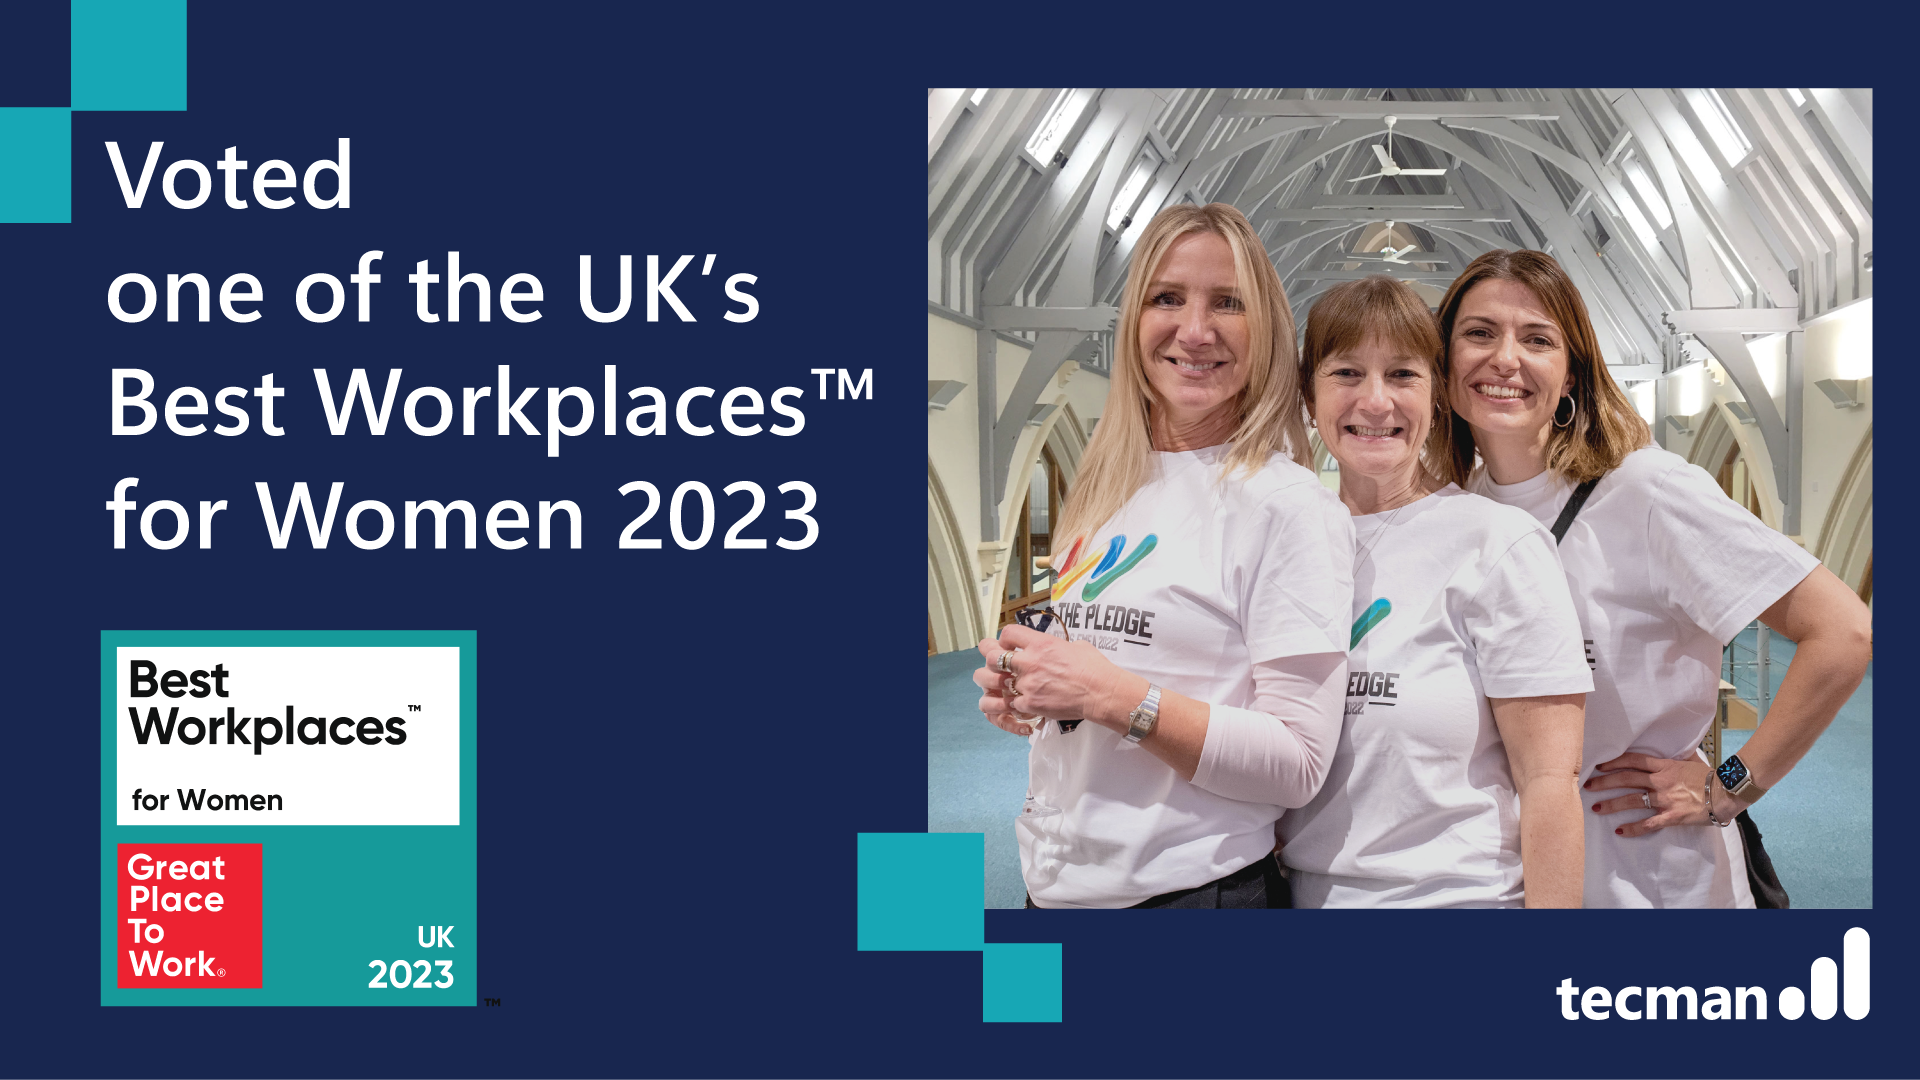 Tecman officially named a UK’s Best Workplace™ for Women for the second year in a row!